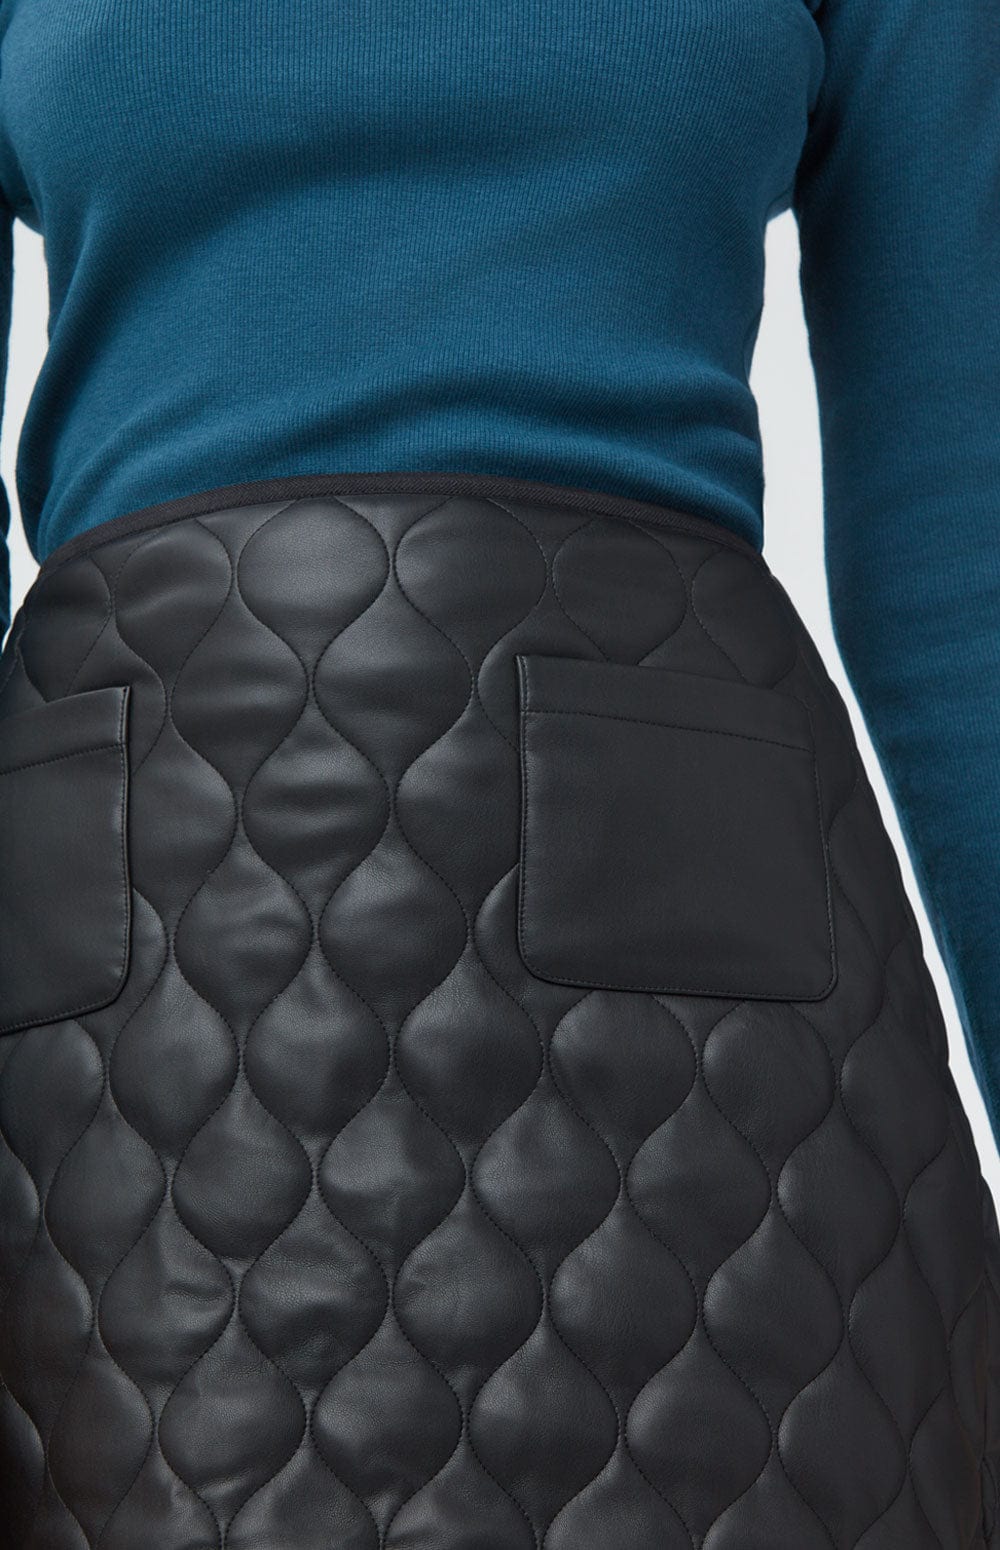 Alp N Rock Womens Skirt Kiko Quilted Skirt | Black Faux Leather